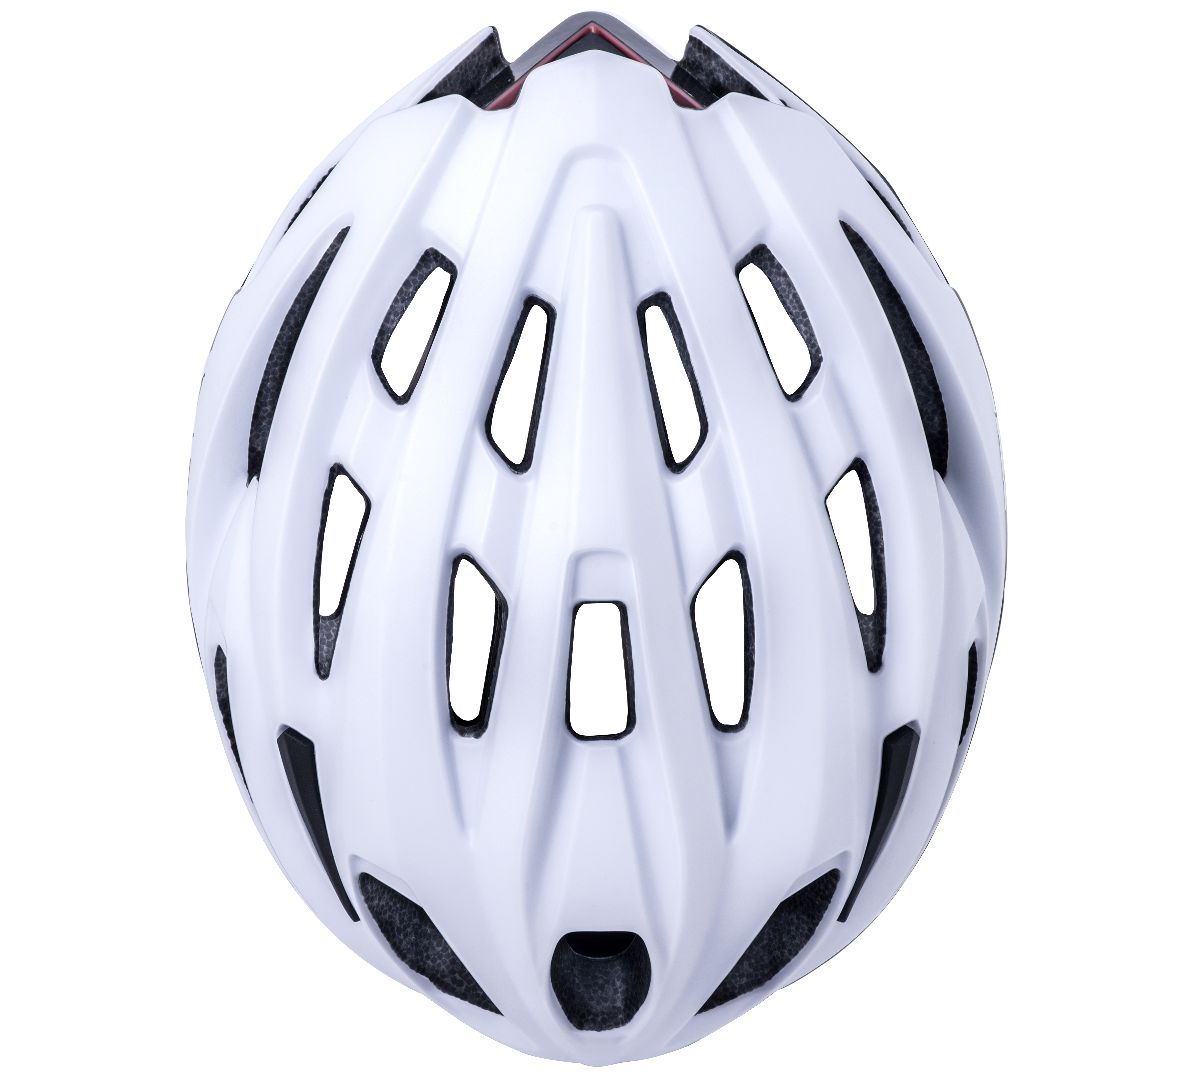 Kali Protectives Therapy Road Bike Helmet (S – XL)